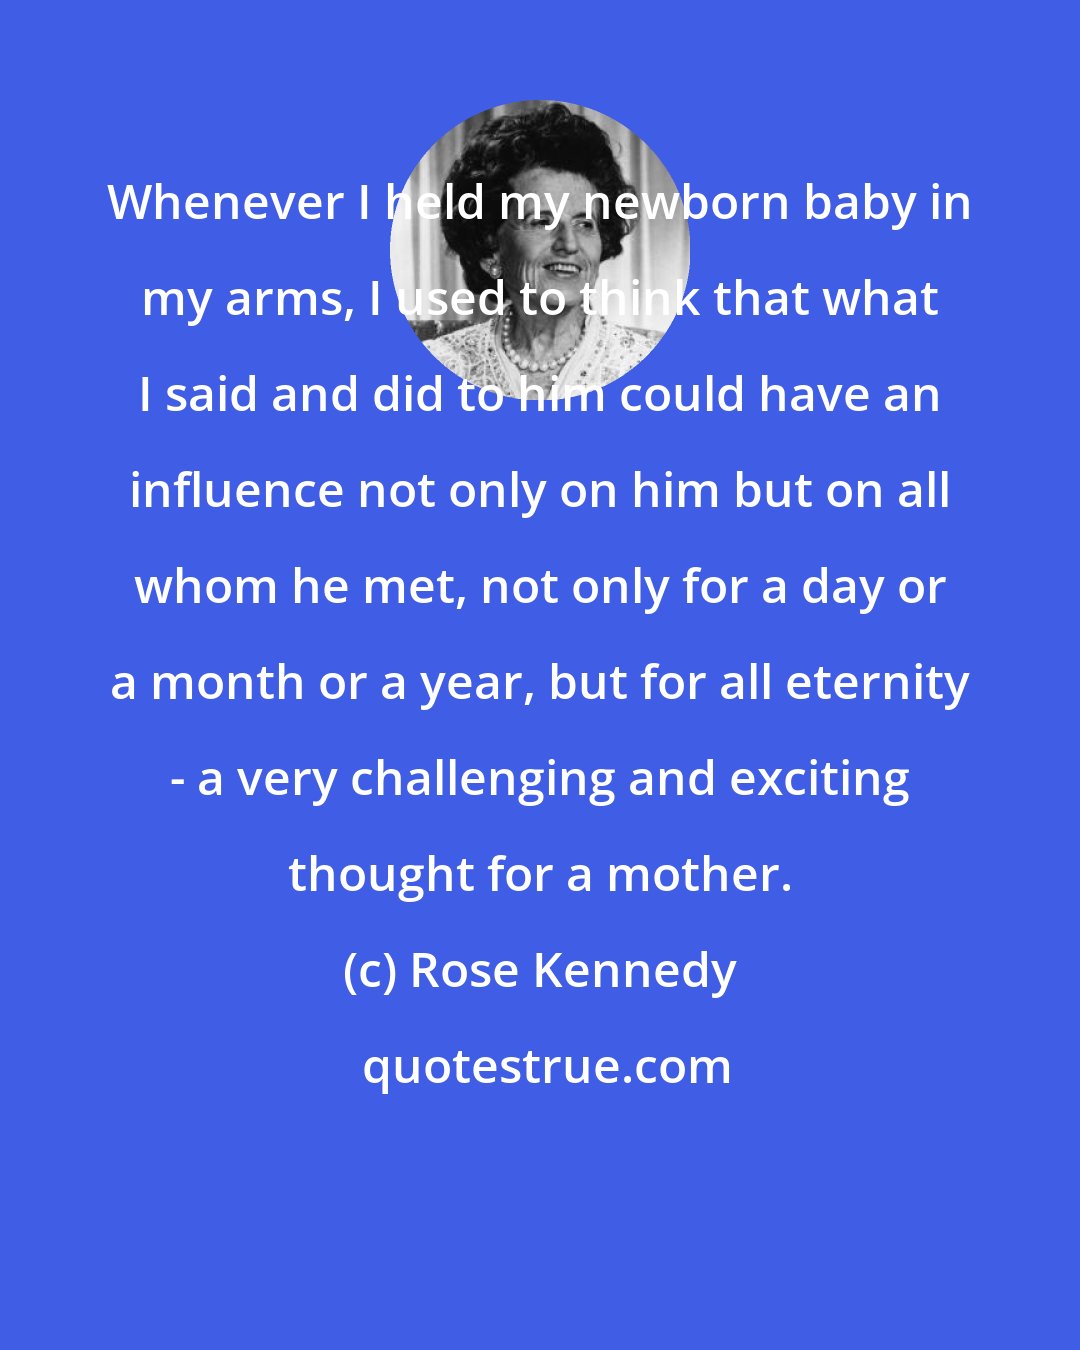 Rose Kennedy: Whenever I held my newborn baby in my arms, I used to think that what I said and did to him could have an influence not only on him but on all whom he met, not only for a day or a month or a year, but for all eternity - a very challenging and exciting thought for a mother.